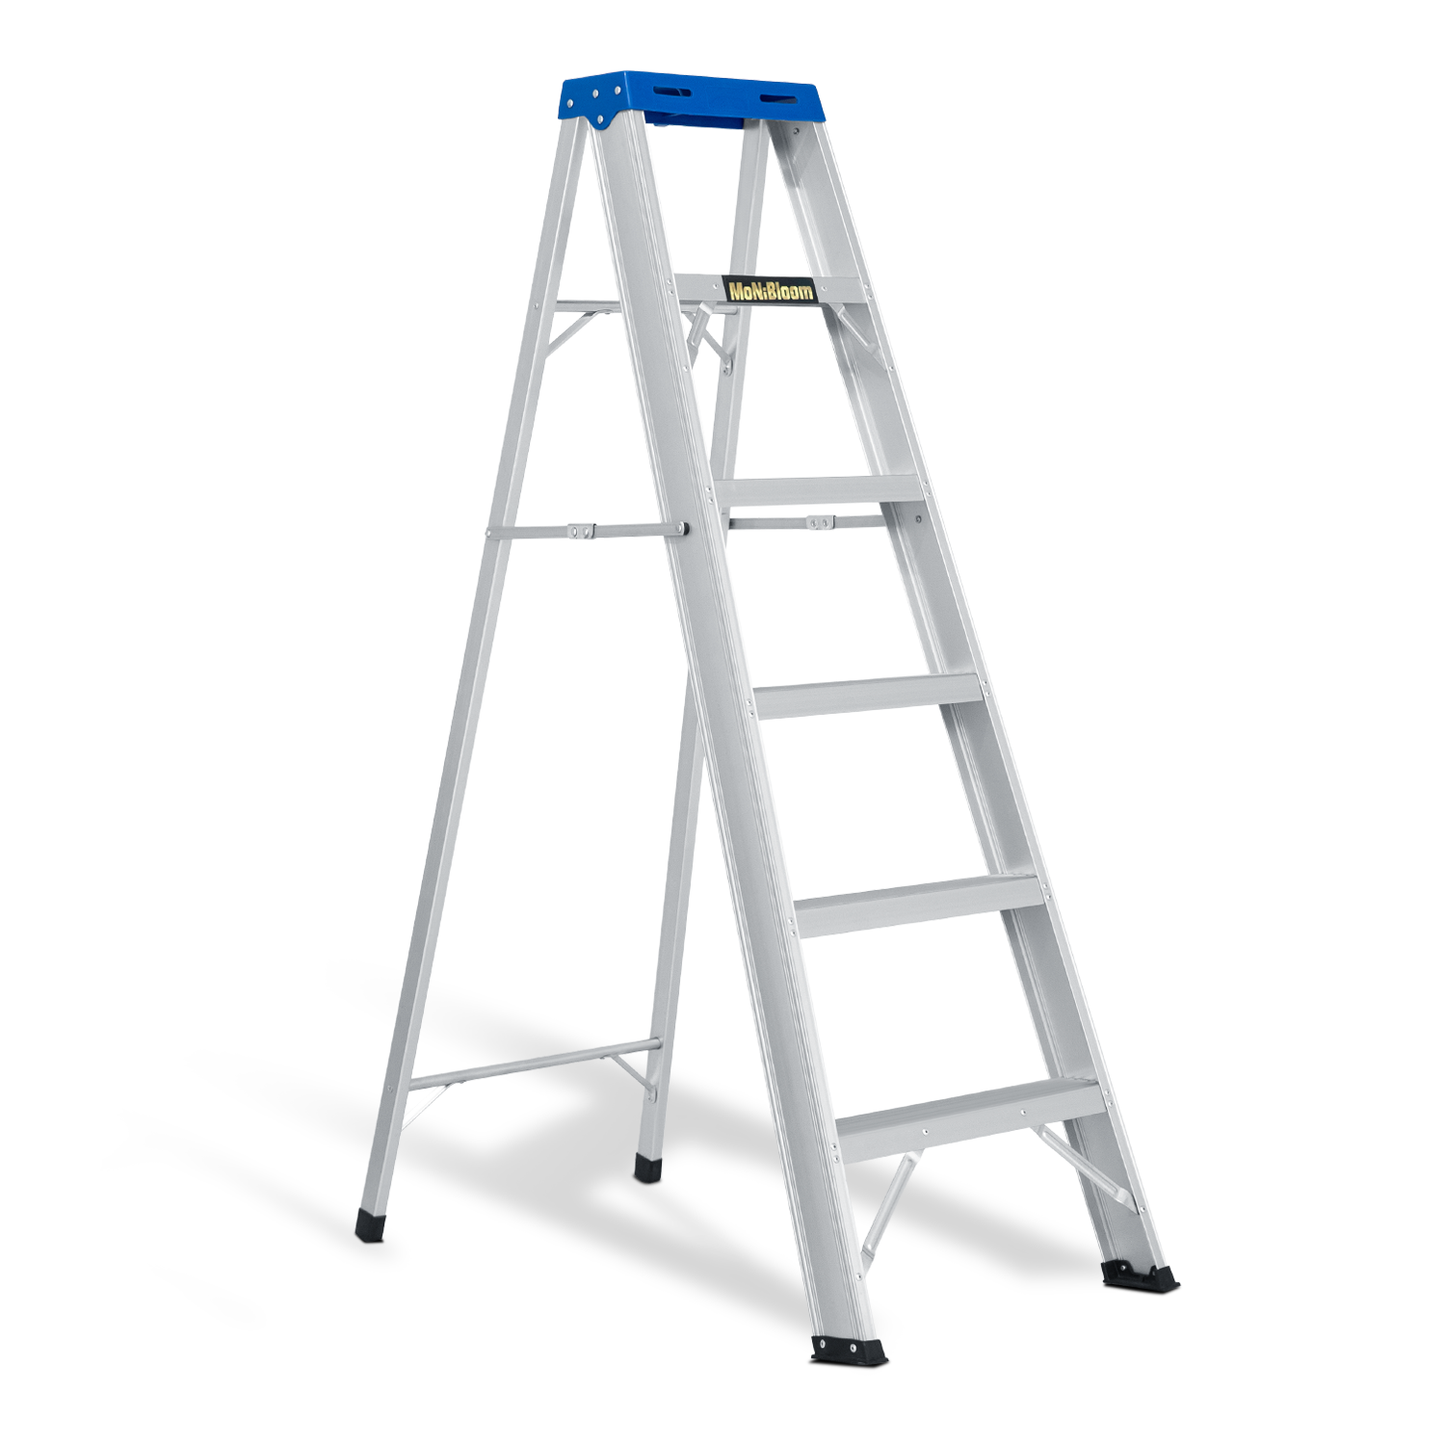 A-Frame Folding Ladder w/Tool Tray - 5 Steps 4.88 ft/58.5", Blue/Silver